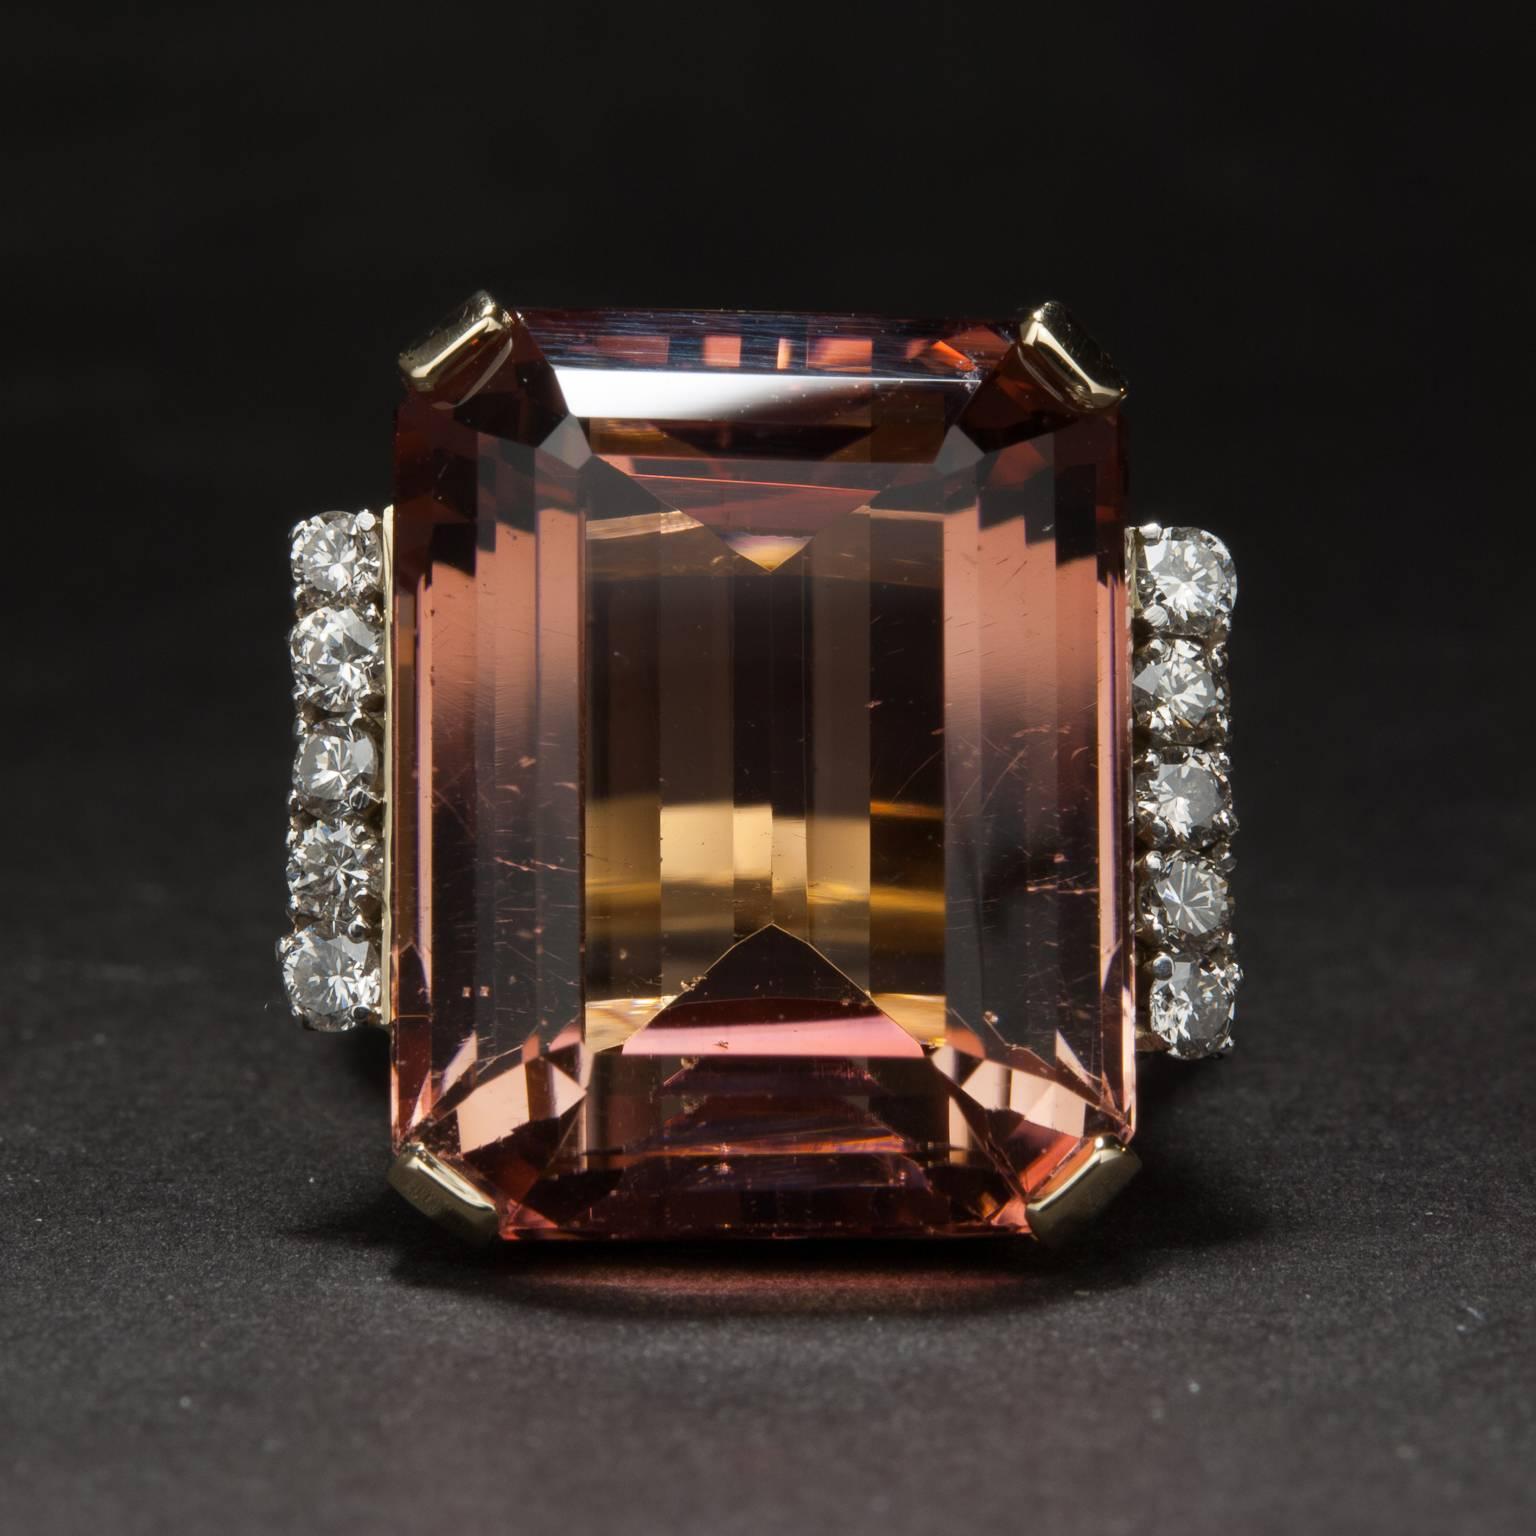 This stunning ring features a 27.90 carat pink tourmaline which is accented by .40 total carats of diamonds. The head of the ring measures 20.4mm wide by 20mm tall by 13mm deep. The ring is made in 18k yellow gold and is currently size 6.5, although